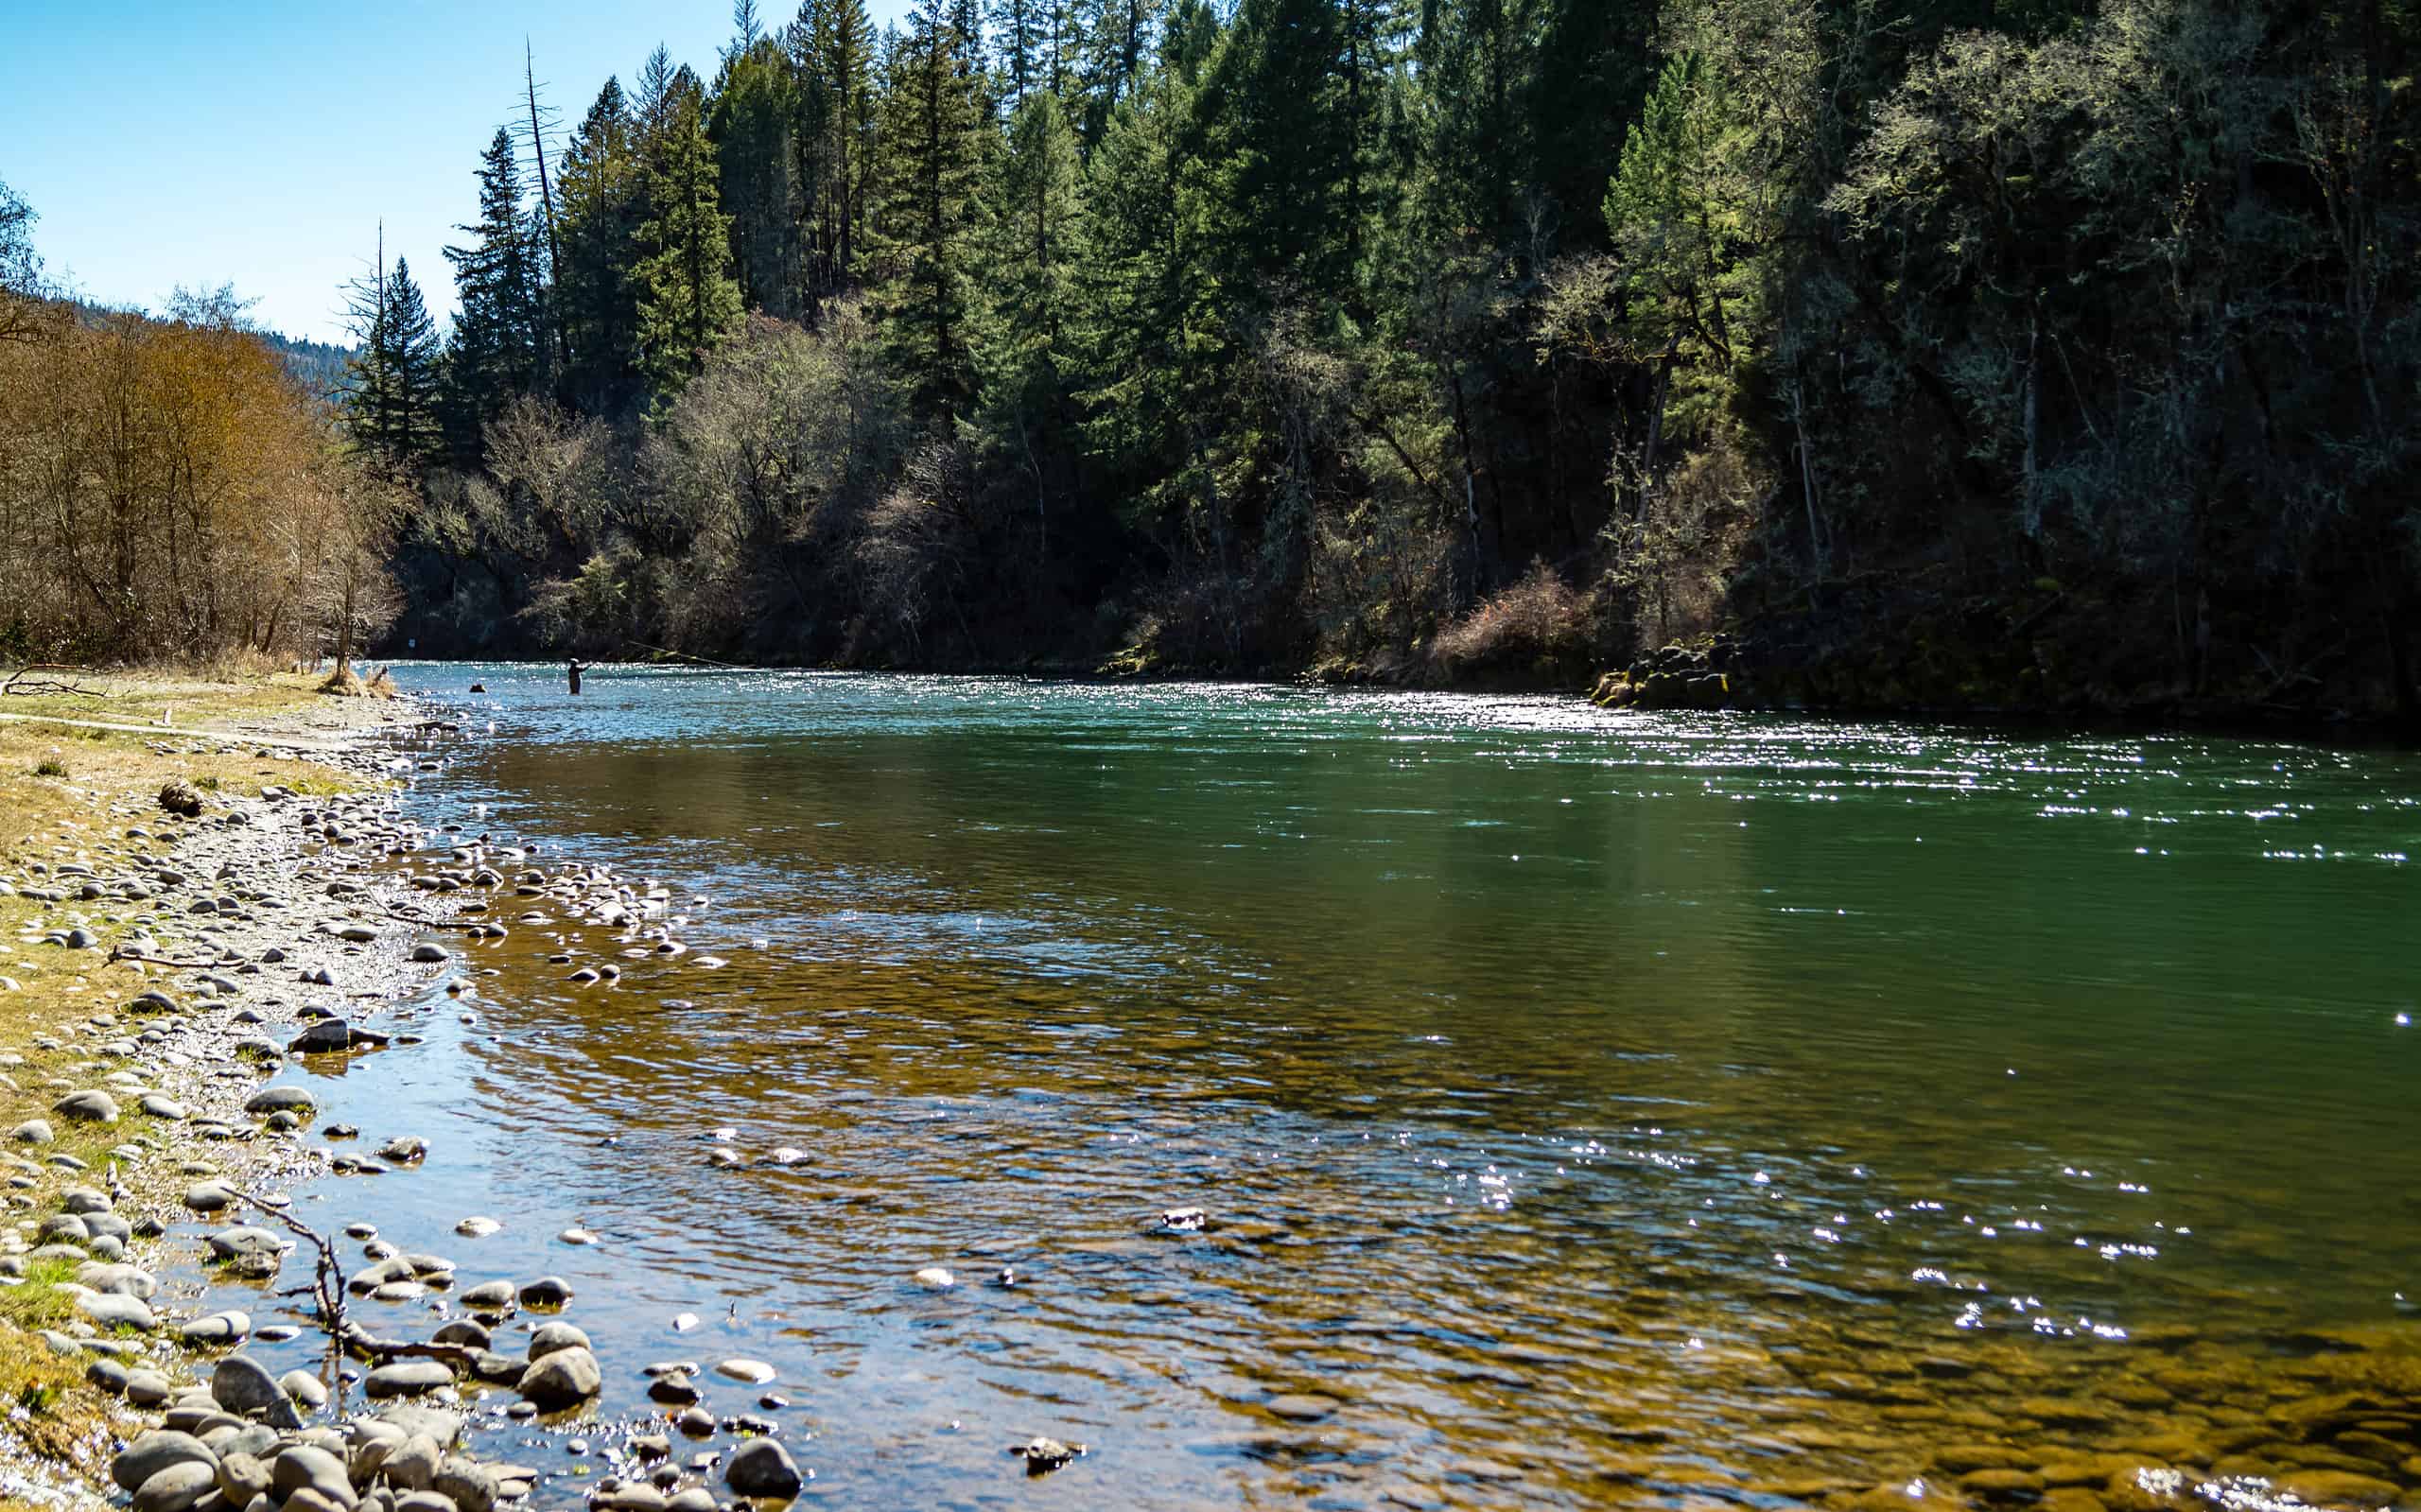 The Rogue River flows through Casey State Recreation Site